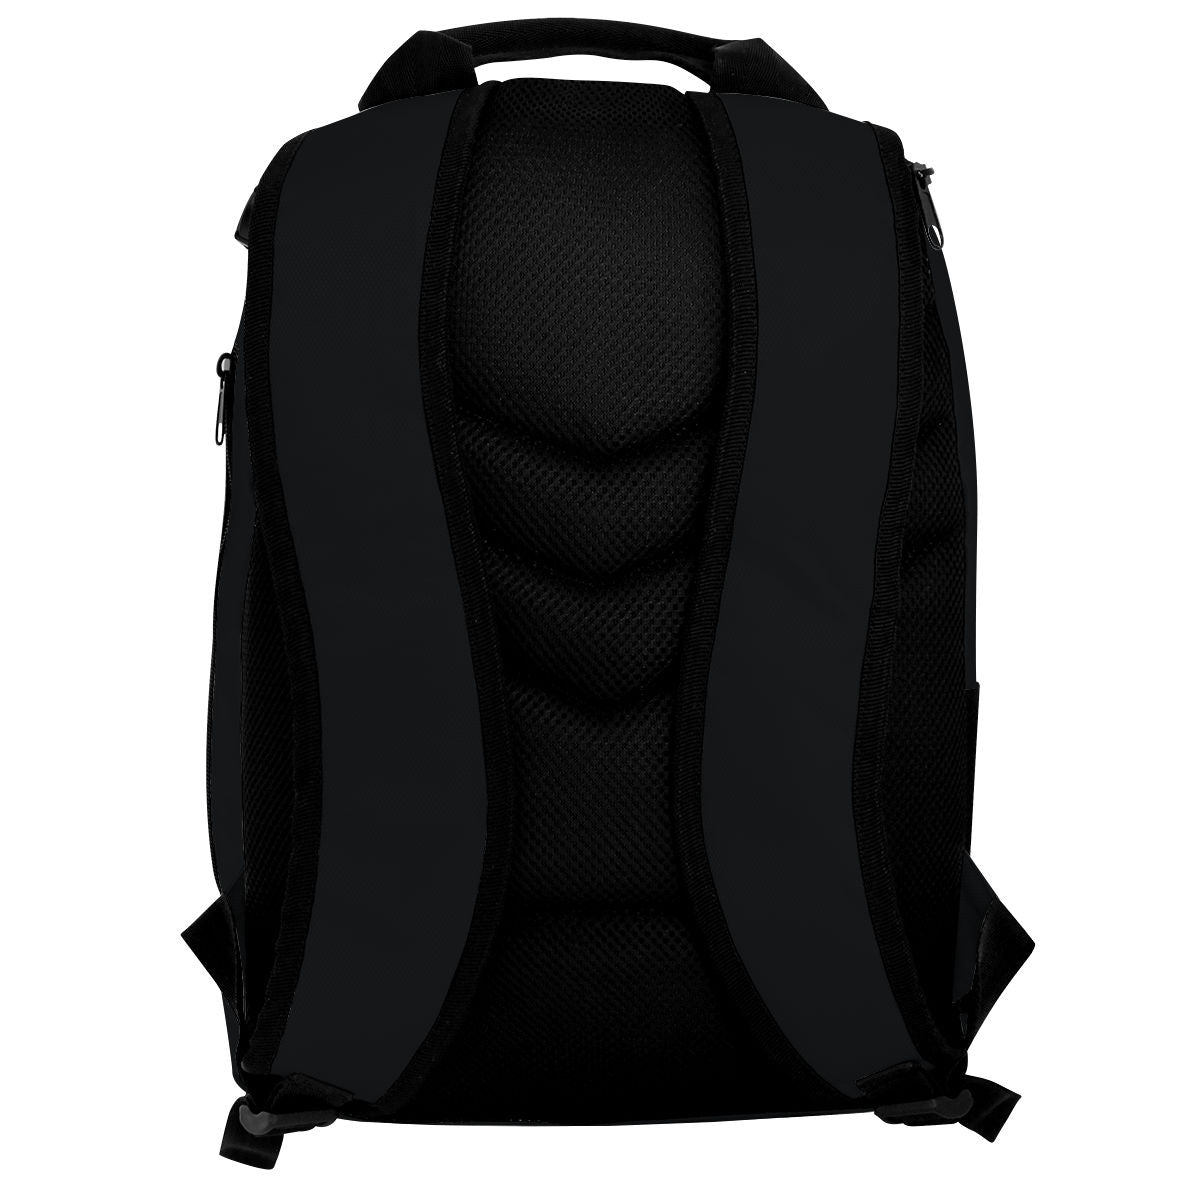 Template09 - Backpack